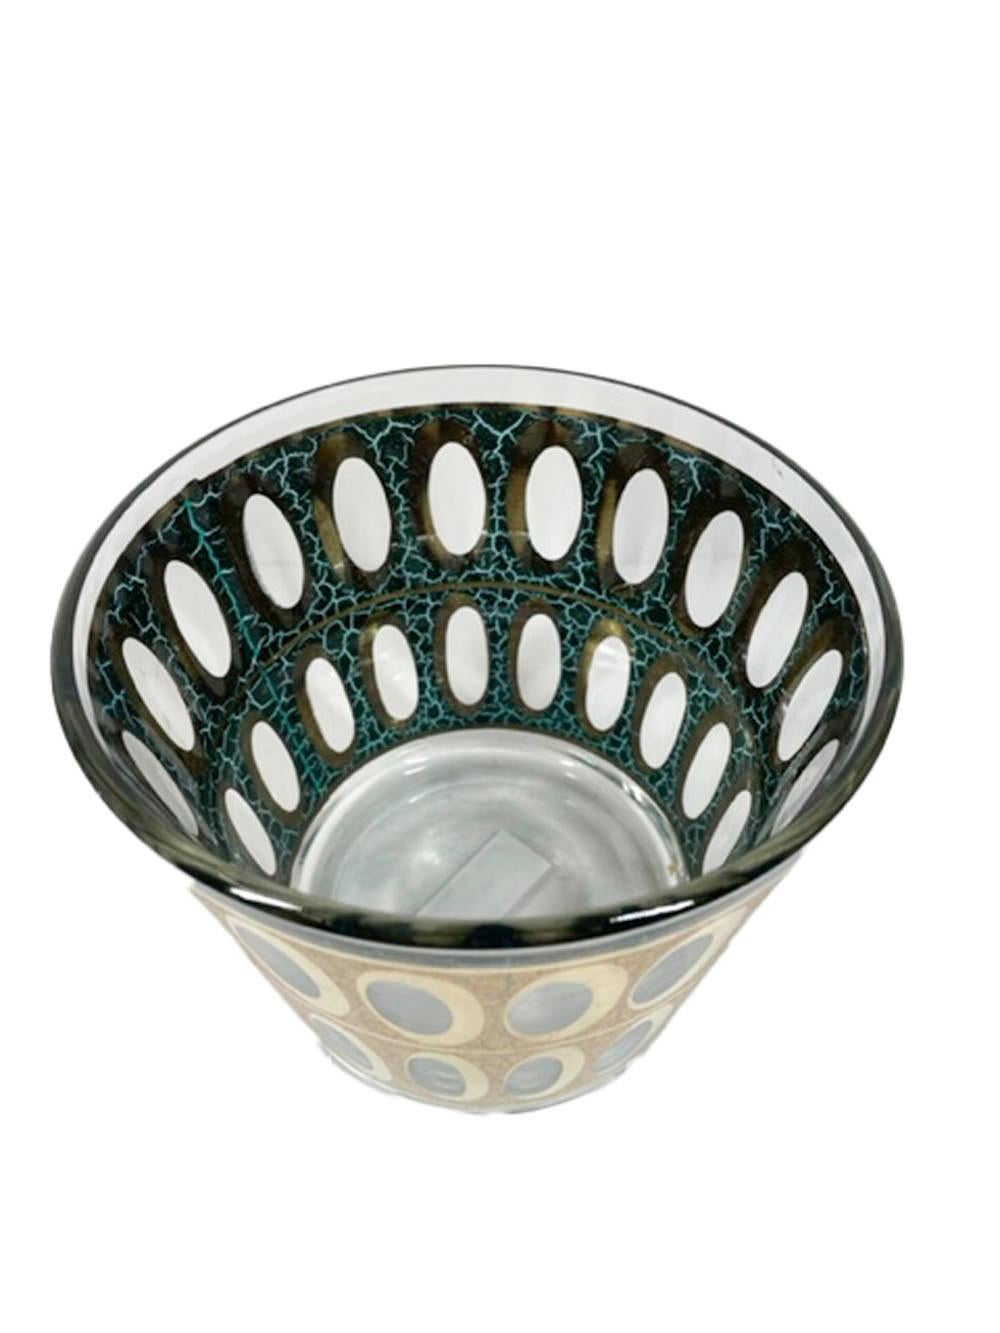 20th Century Mid-Century Modern Ice Bowl by Culver, LTD, in the 